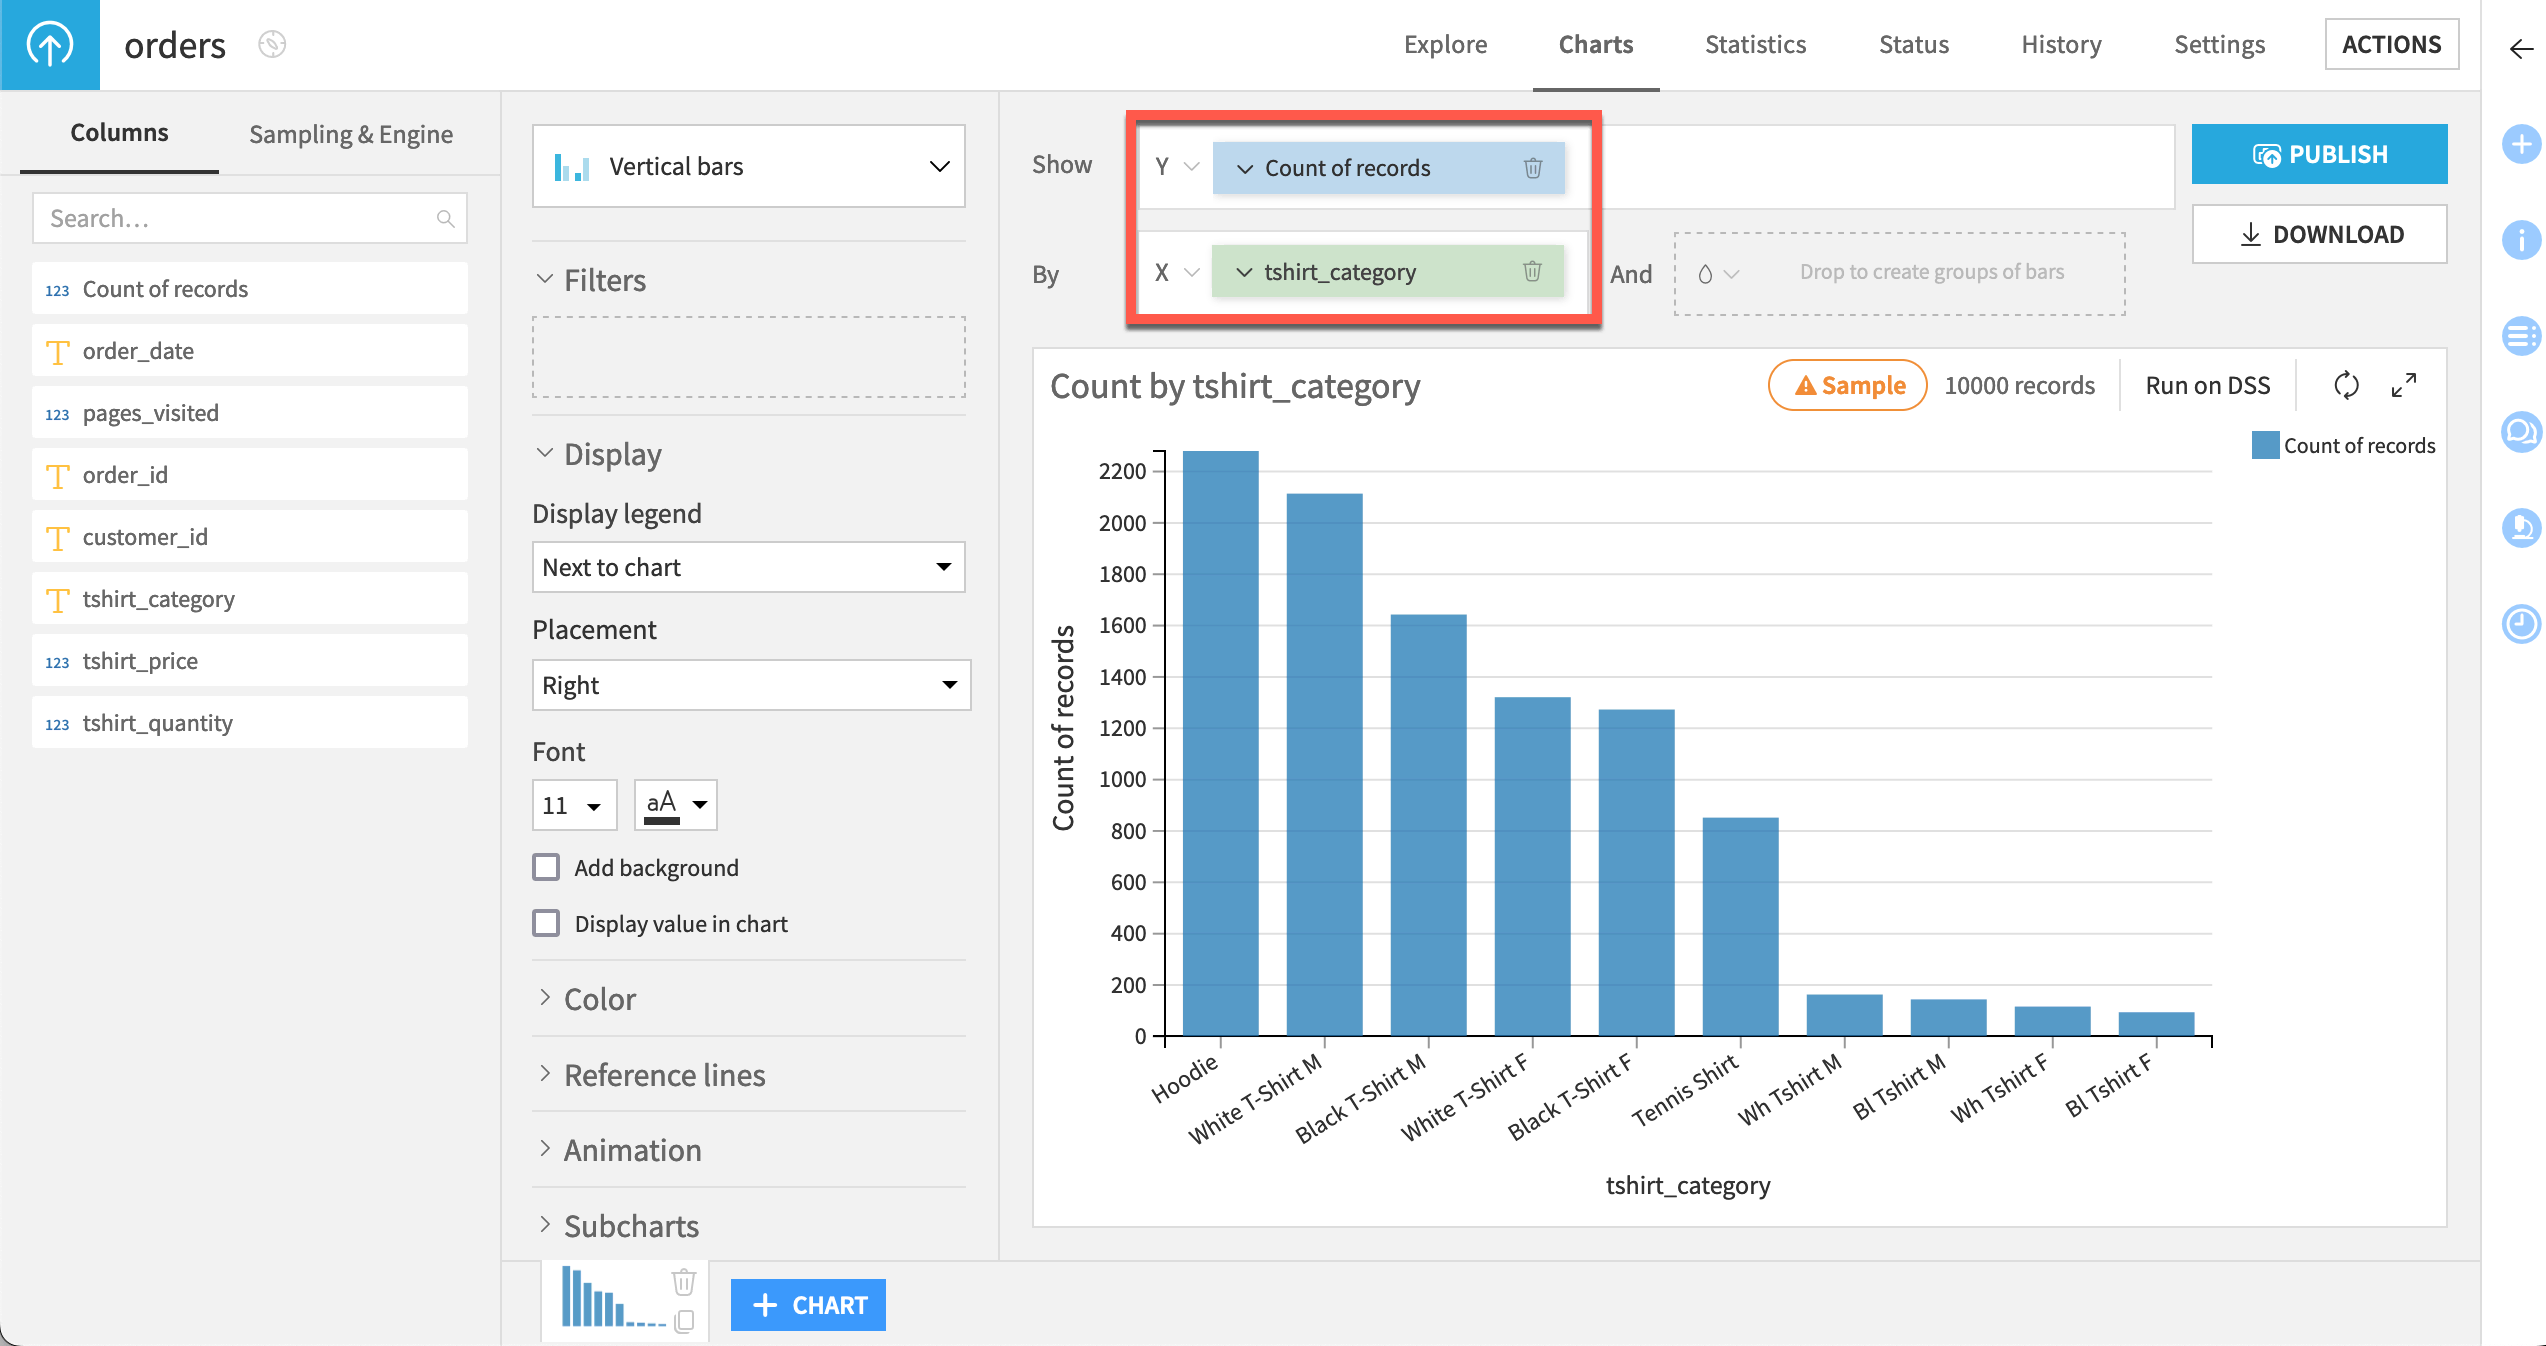 A Dataiku screenshot showing a chart of *Count of records* by *tshirt_category* for the current data sample.